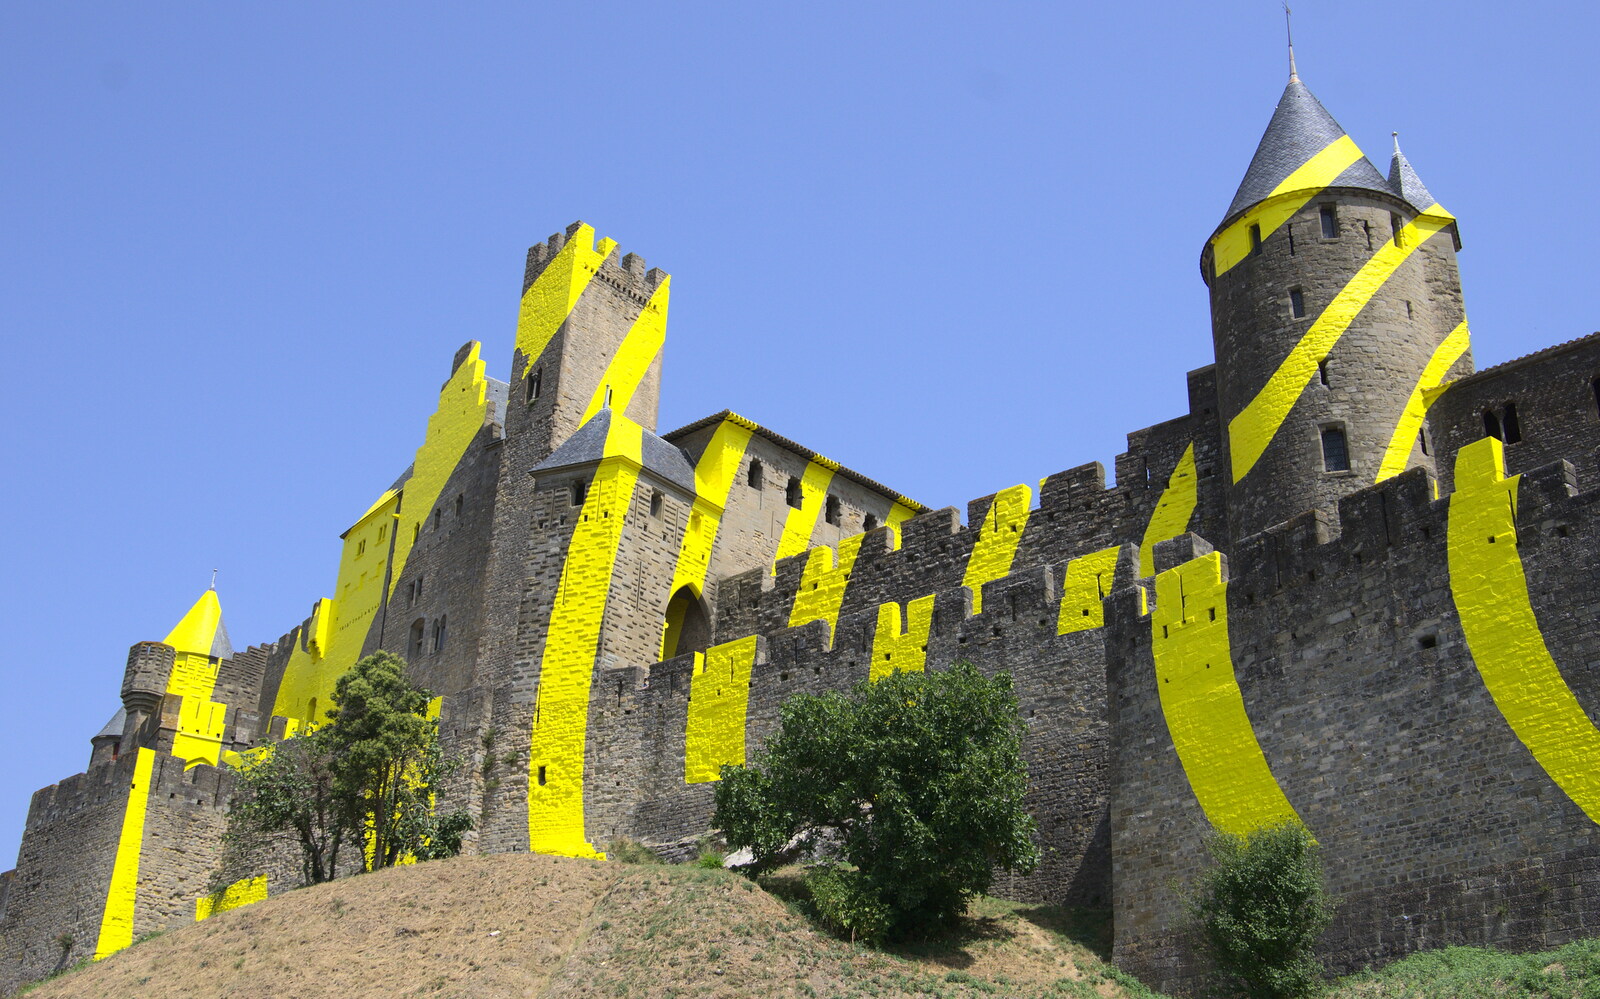 The further-out stripes are big from A Trip to Carcassonne, Aude, France - 8th August 2018